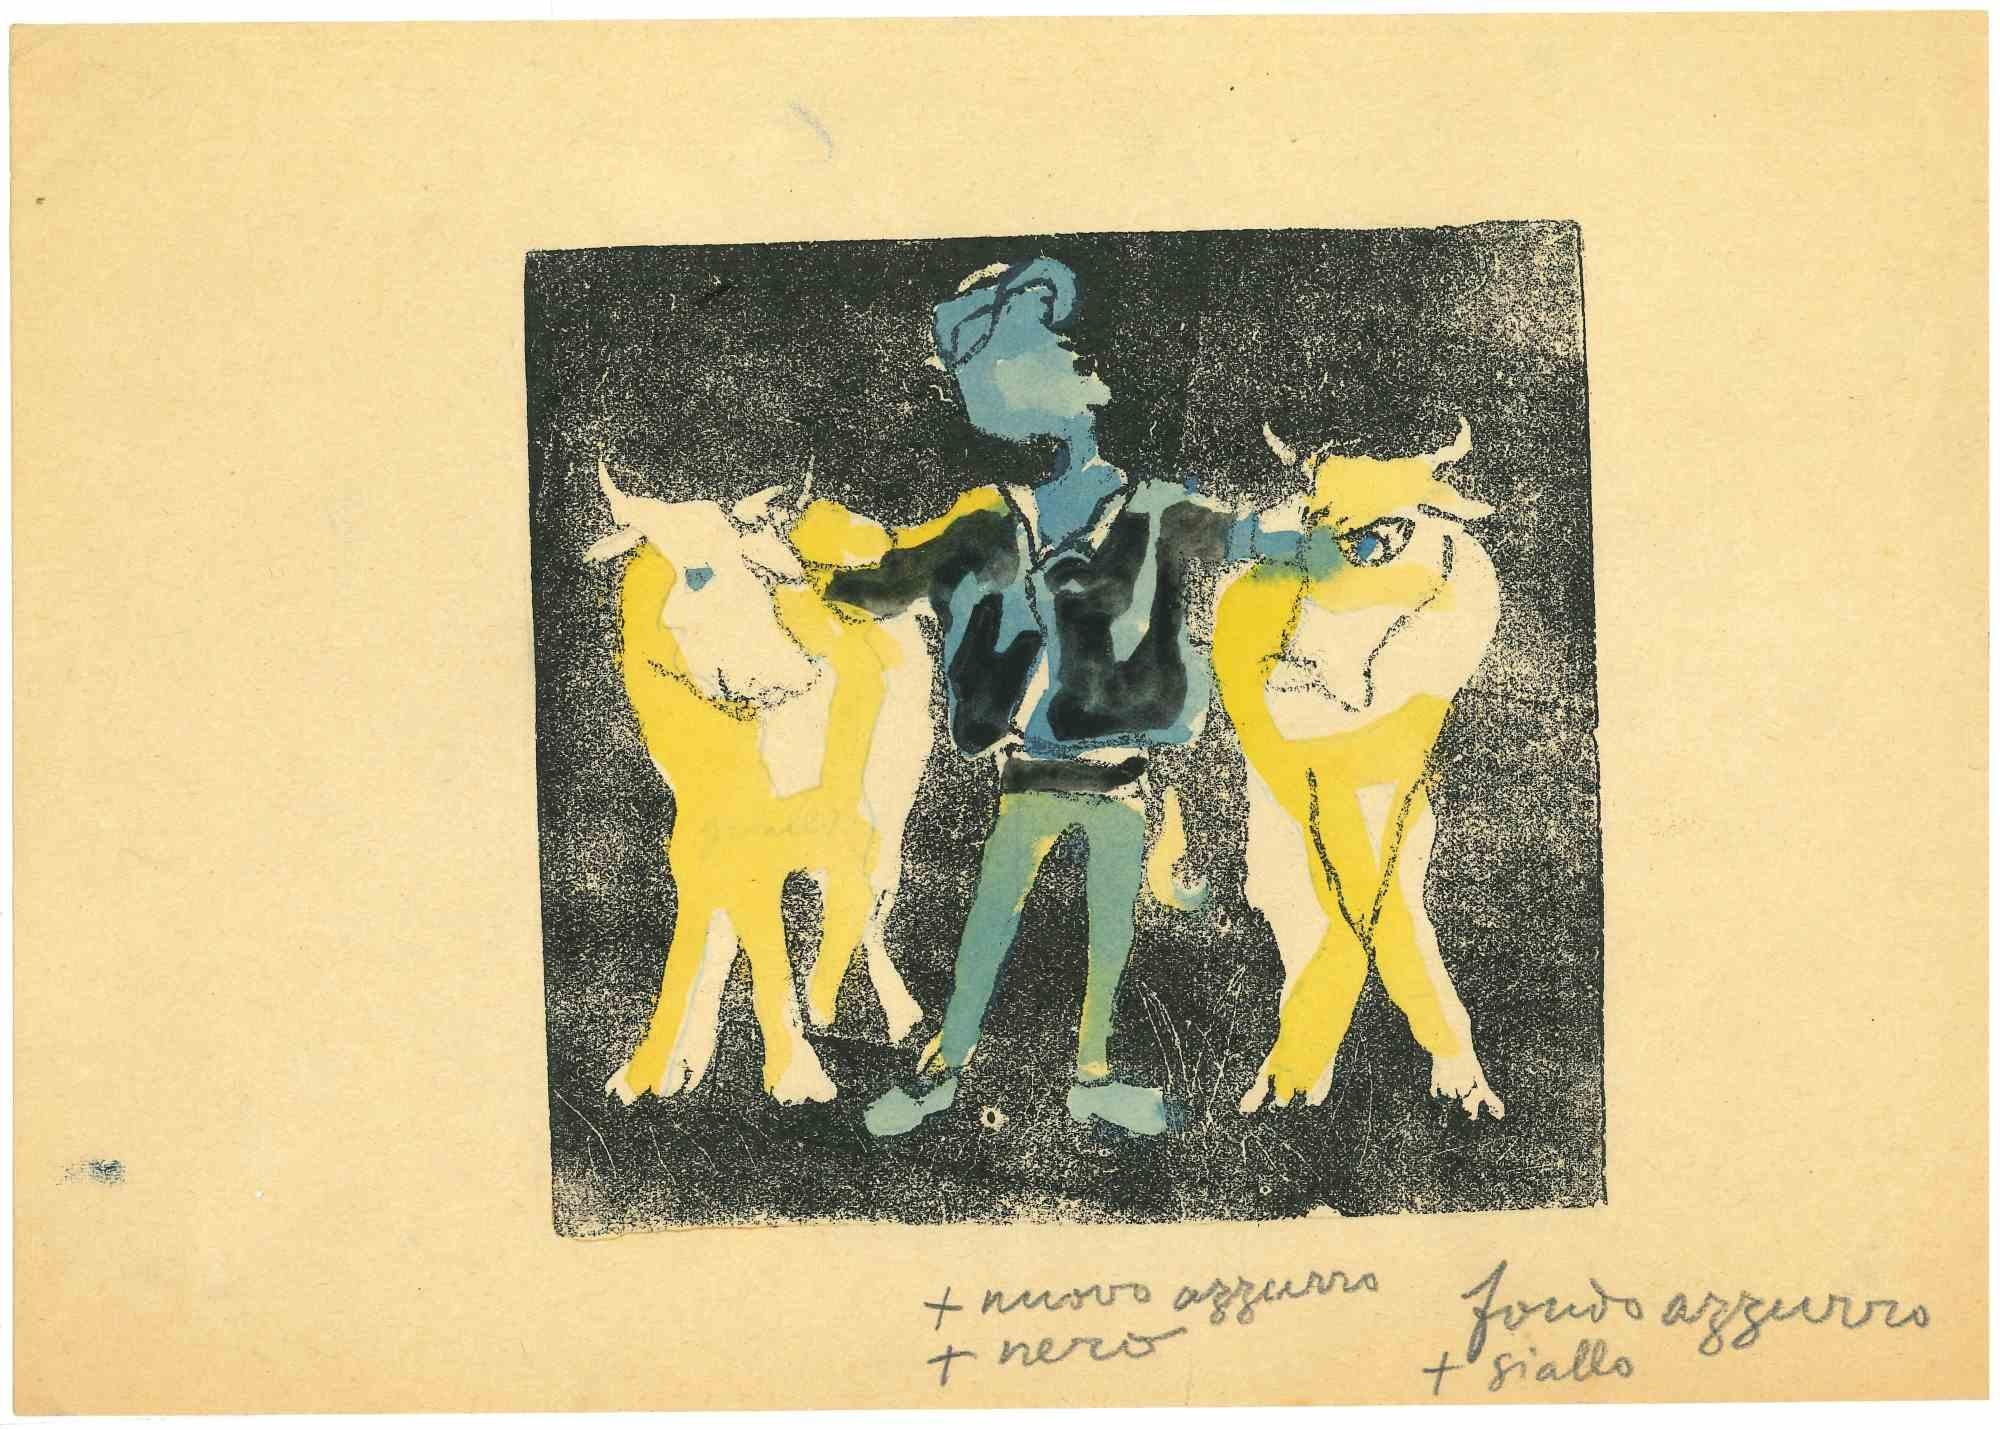 Bullfighter is an Original Hand-watercolored lithograph on cream-colored paper realized by Mino Maccari in the 1950s.

Good conditions.

Mino Maccari (1898-1989) was an Italian writer, painter, engraver, and journalist, winner the Feltrinelli Prize